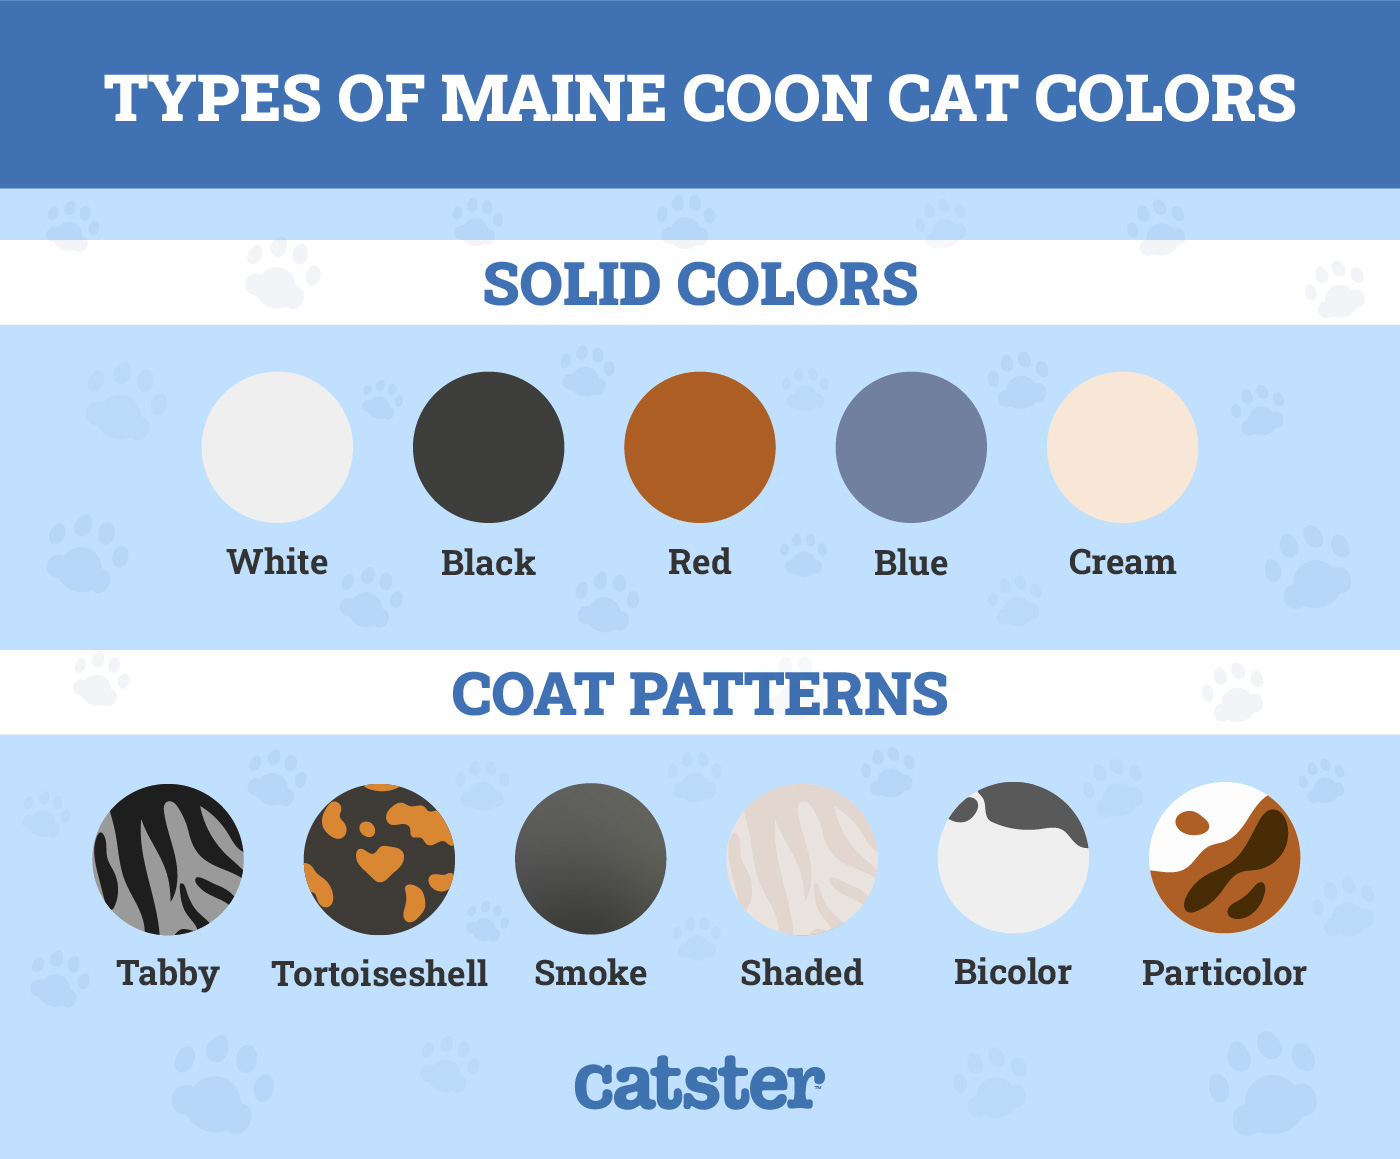 Types of Maine Coon Cat Colors